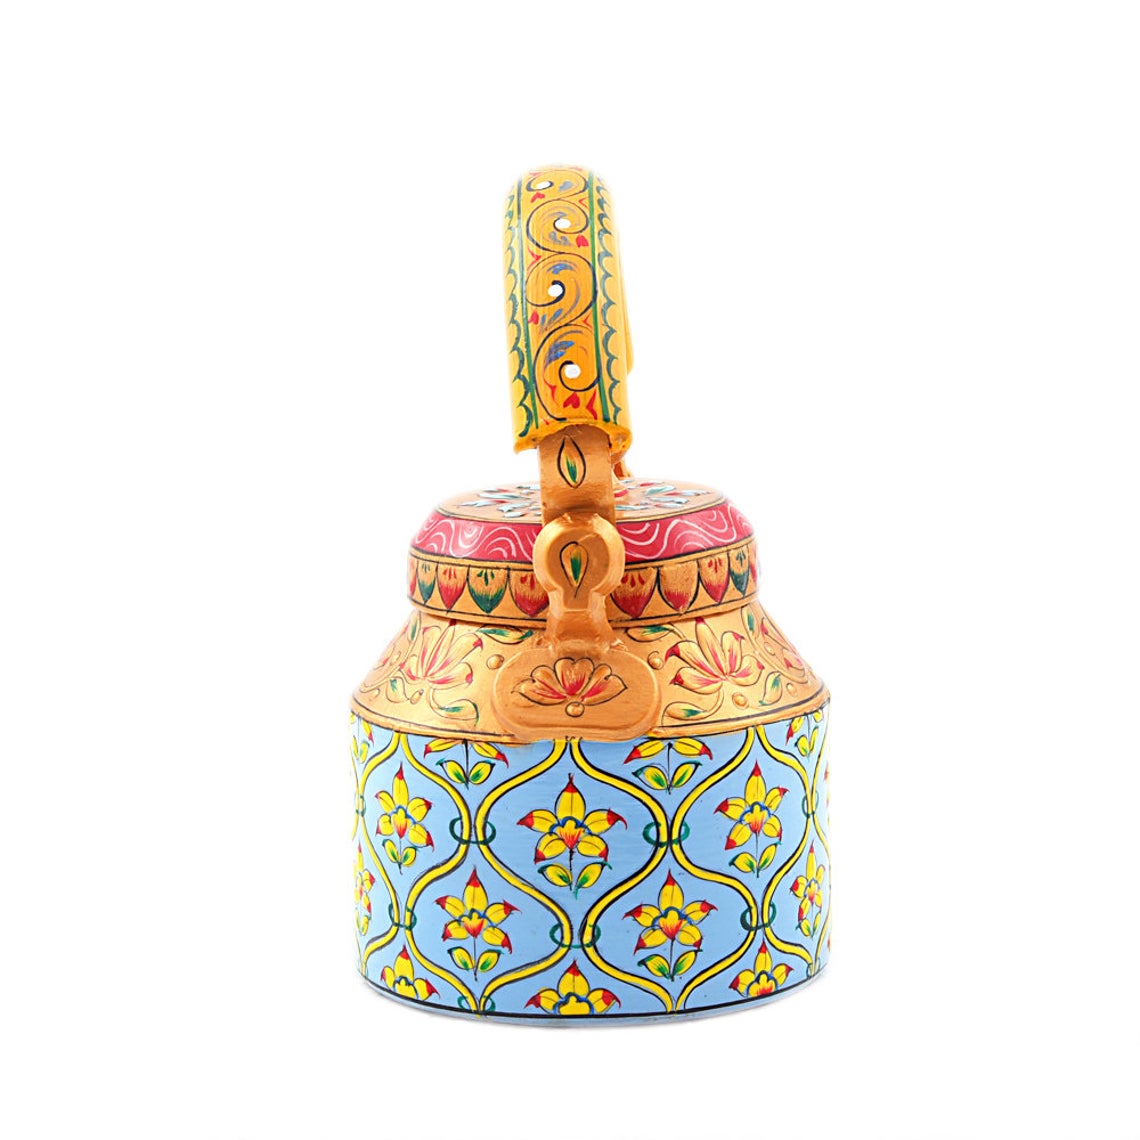 Antique Hand painted tea kettle Interior Design : SKY & Yellow  Chai Kettle, Traditional Indian tea kettle, Tea brewer, Gift for tea lovers